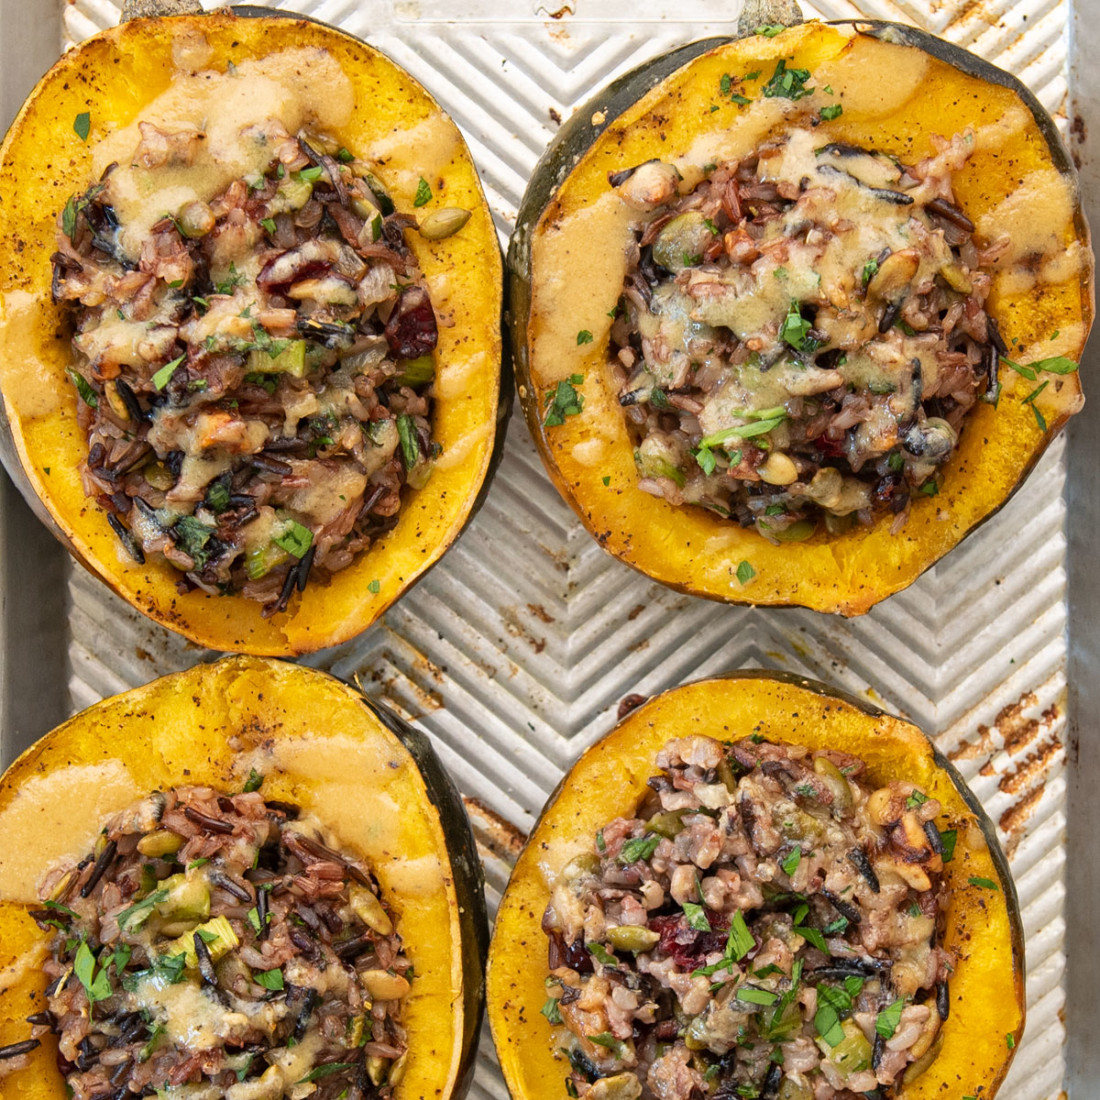 top view of 4 halves of roasted acorn squash stuffed with rice and vegan ingredients on a baking sheet